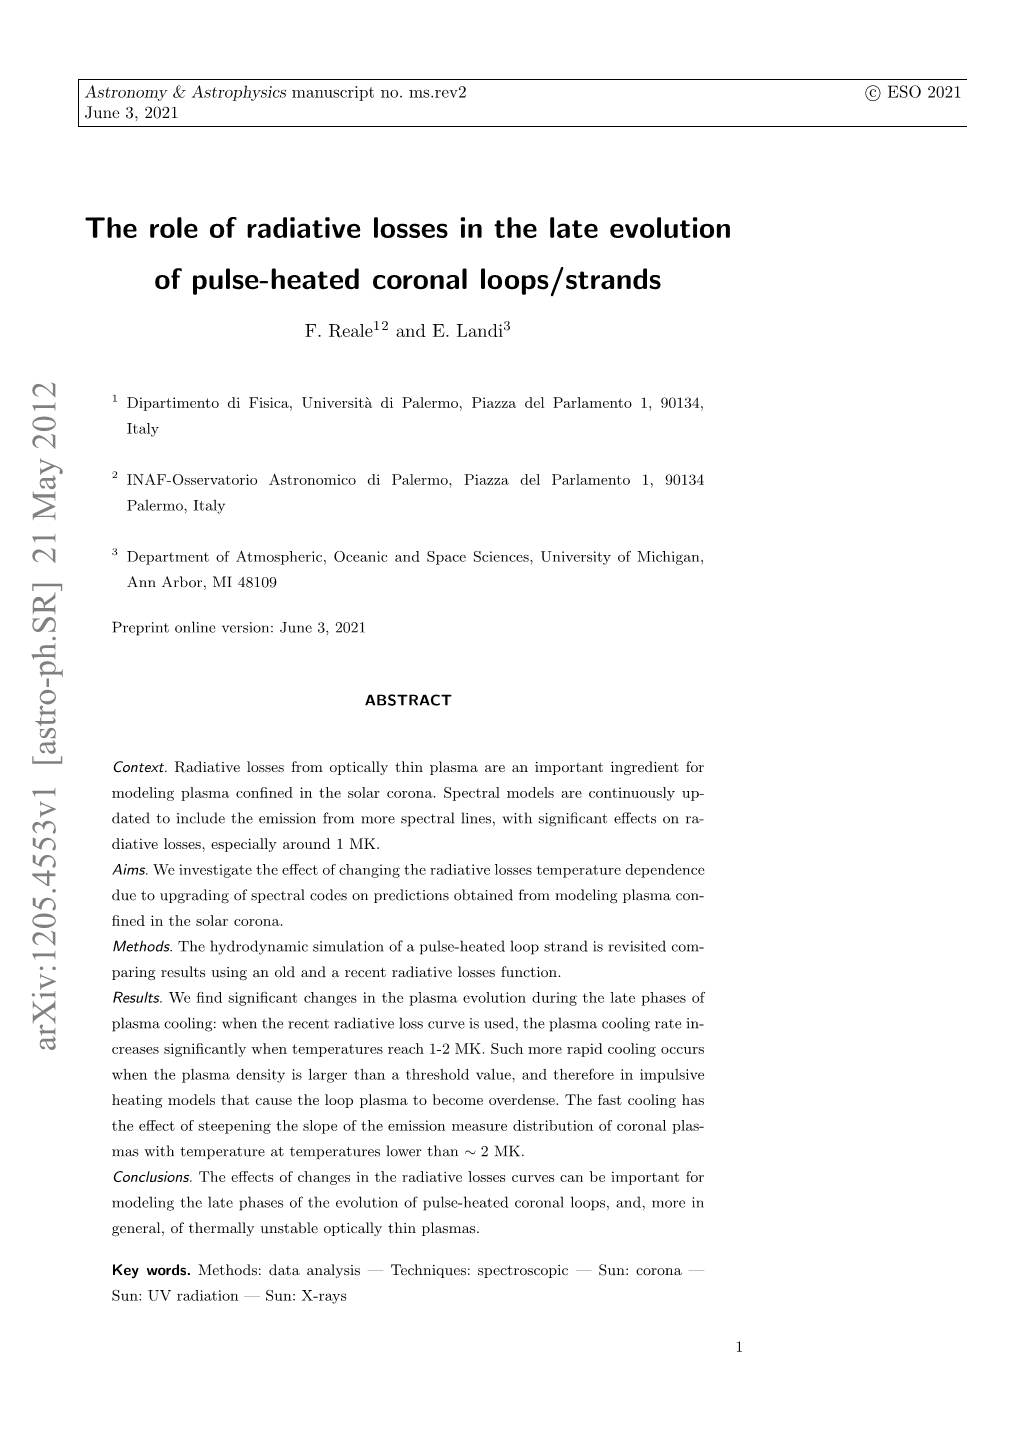 The Role of Radiative Losses in the Late Evolution of Pulse-Heated Coronal